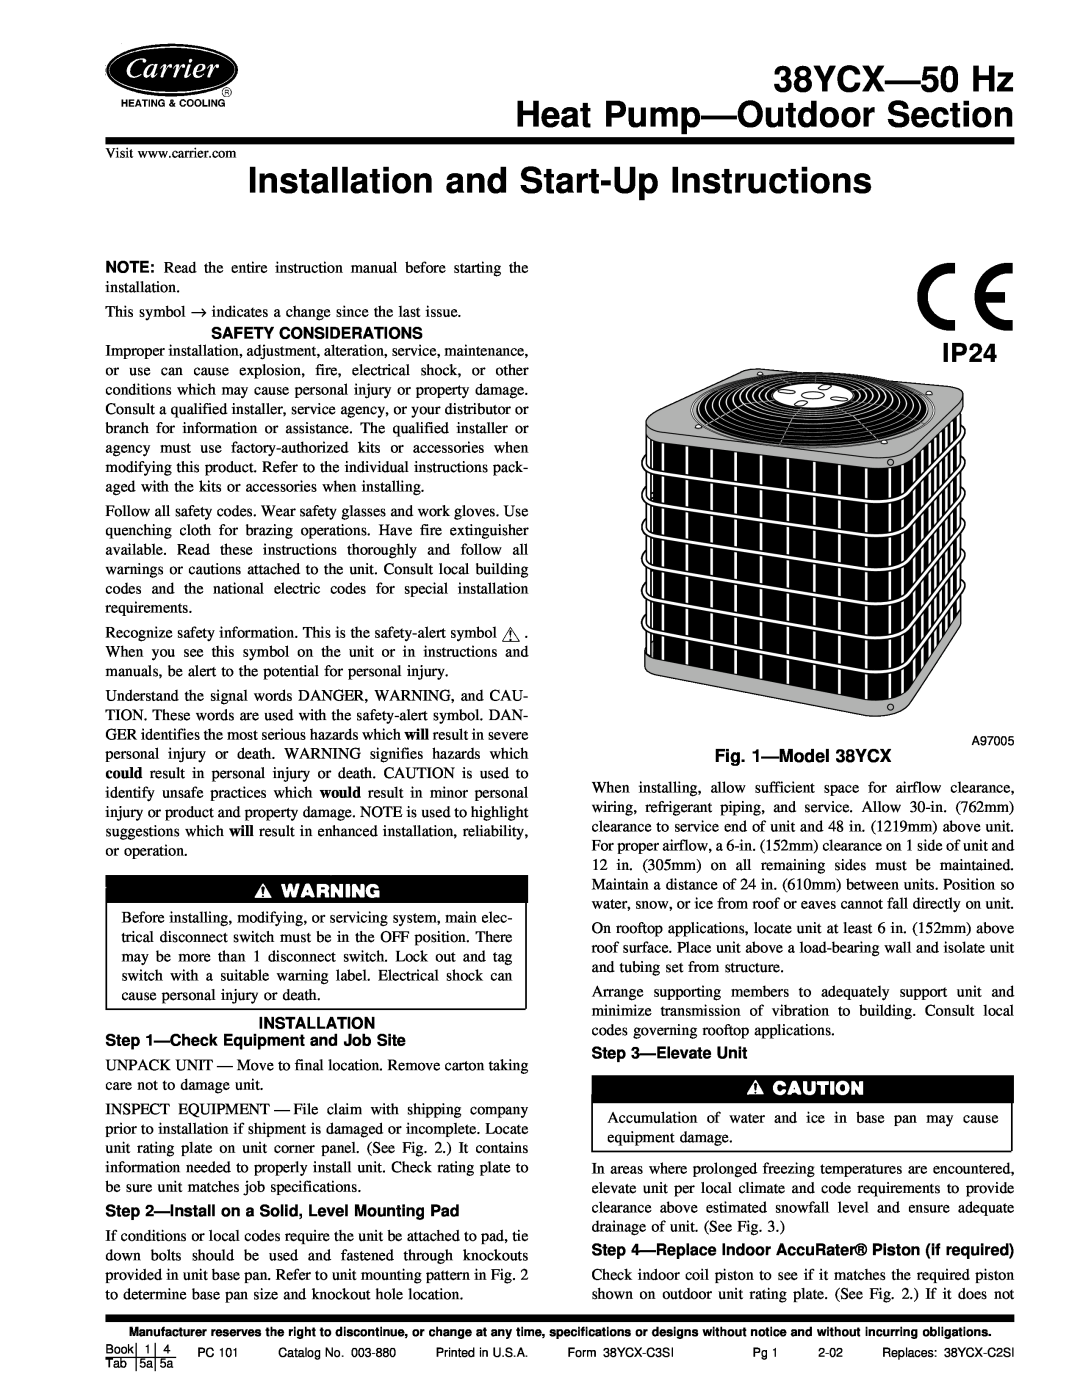 Carrier instruction manual Model38YCX, Safety Considerations, INSTALLATION -CheckEquipment and Job Site, ElevateUnit 